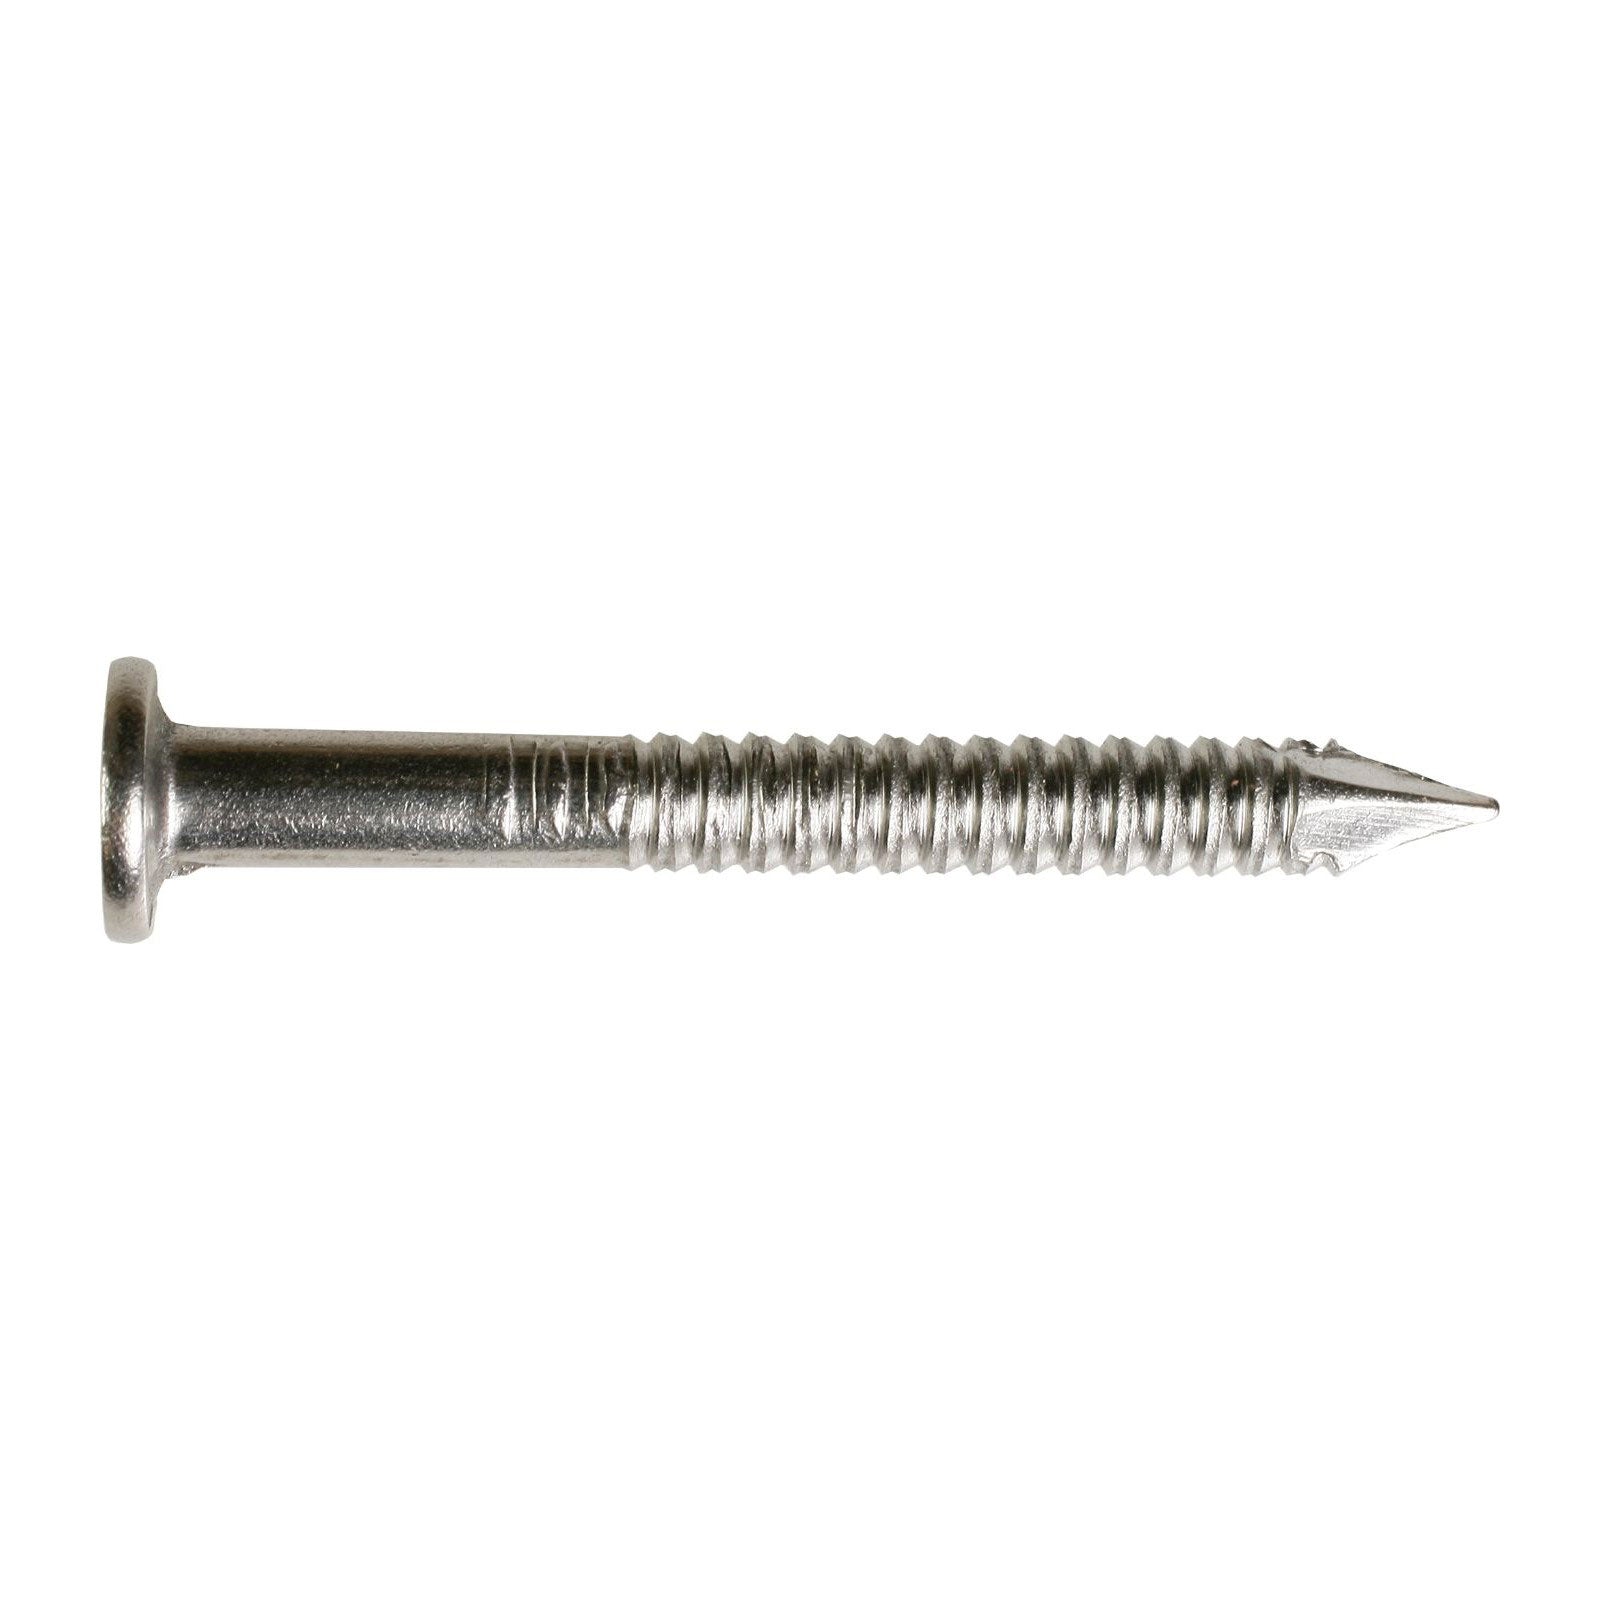 10 ga x 1-3/4 Stainless Steel Ring Shank Nails